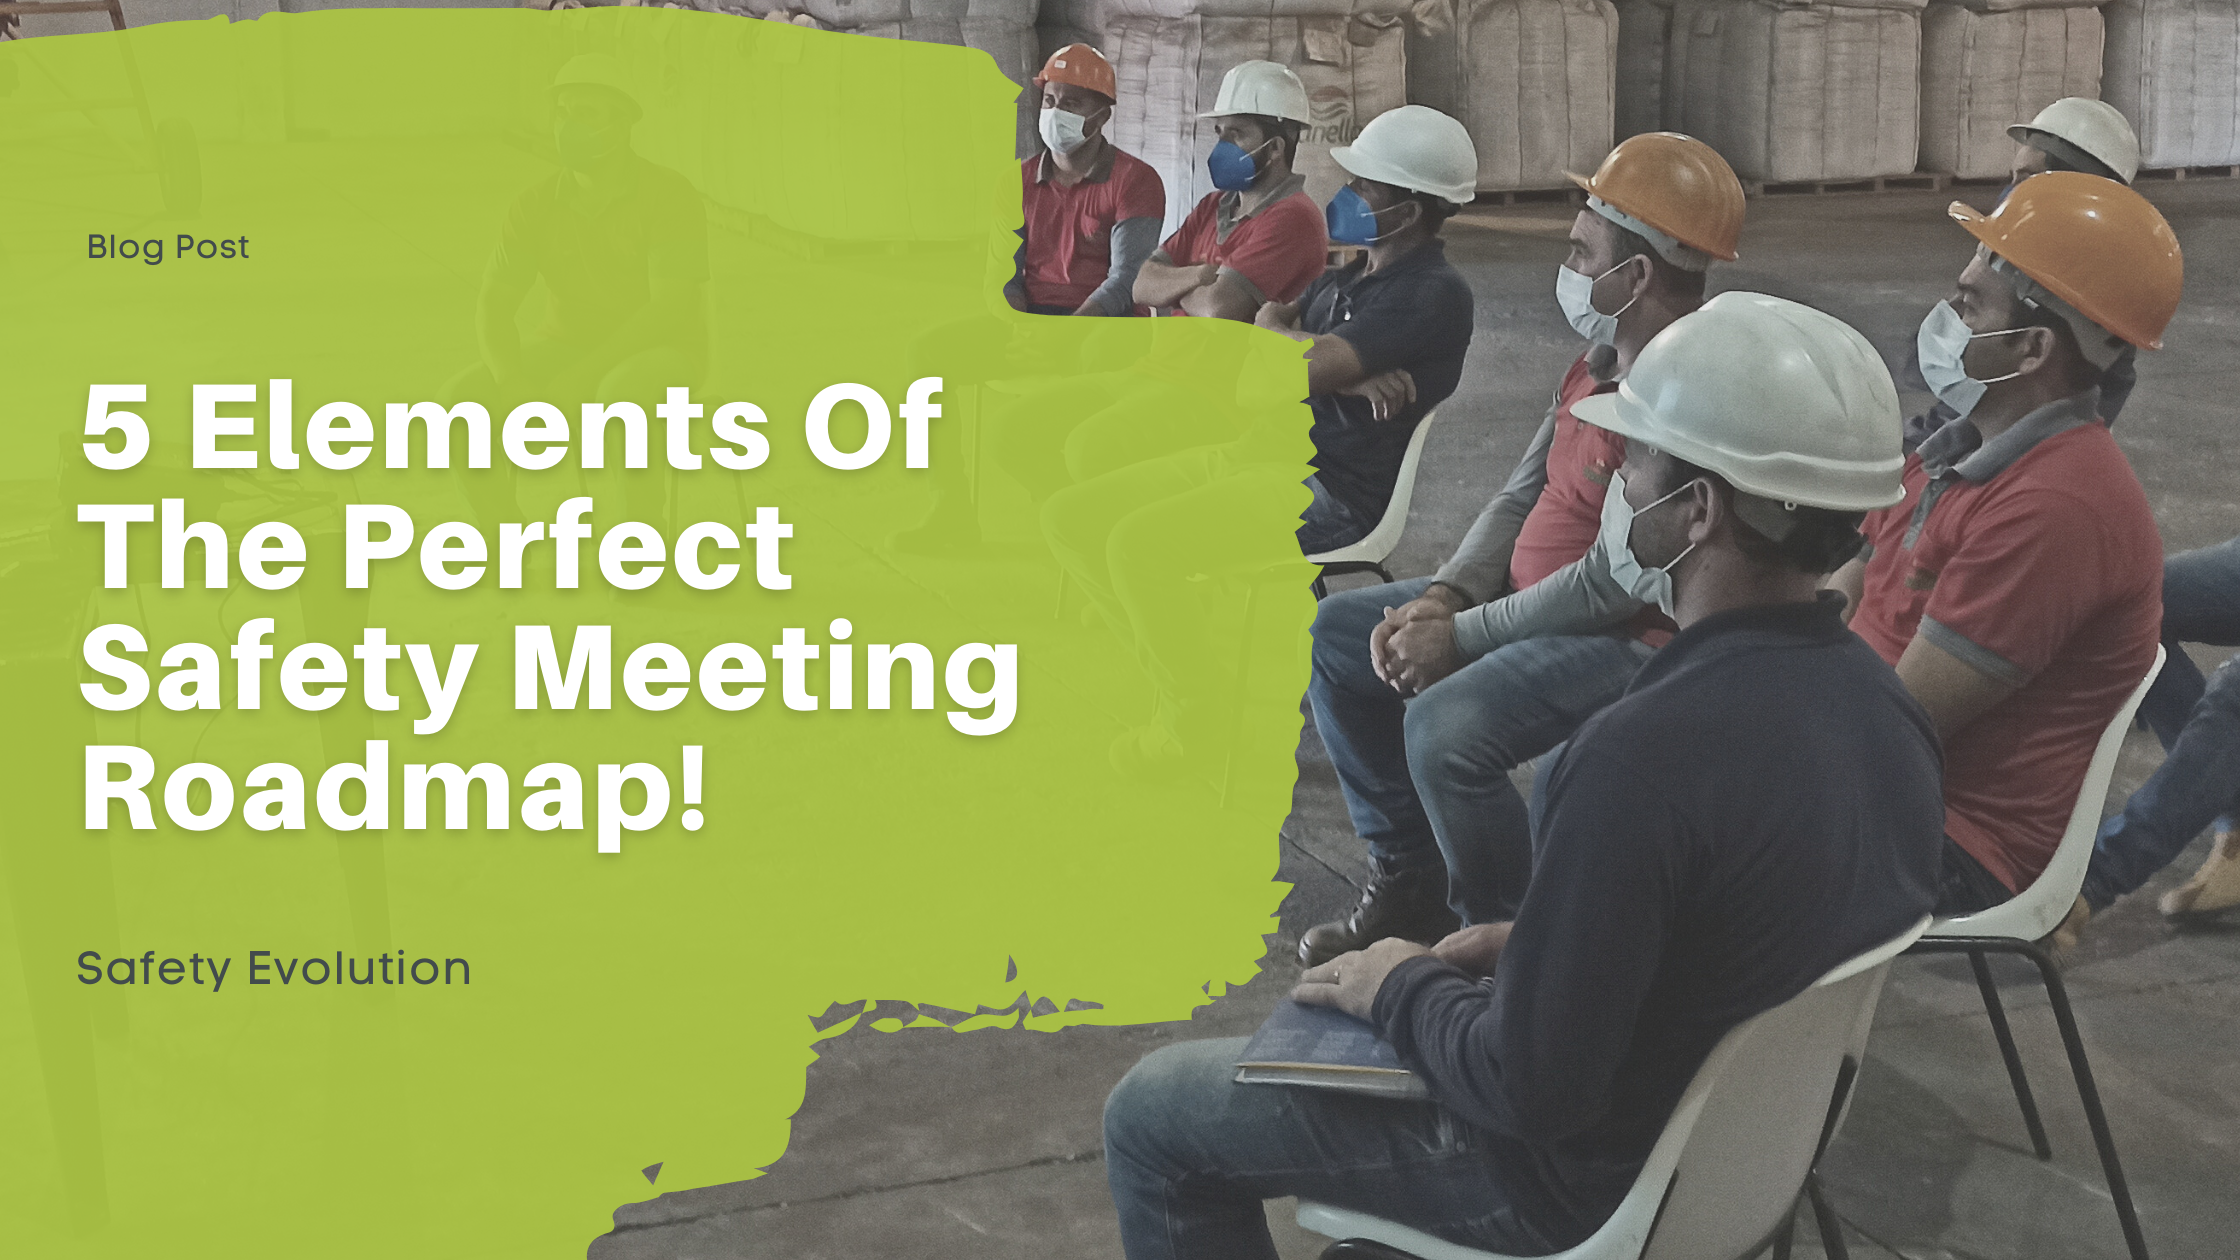 5 Elements of the Perfect Safety Meeting Roadmap!